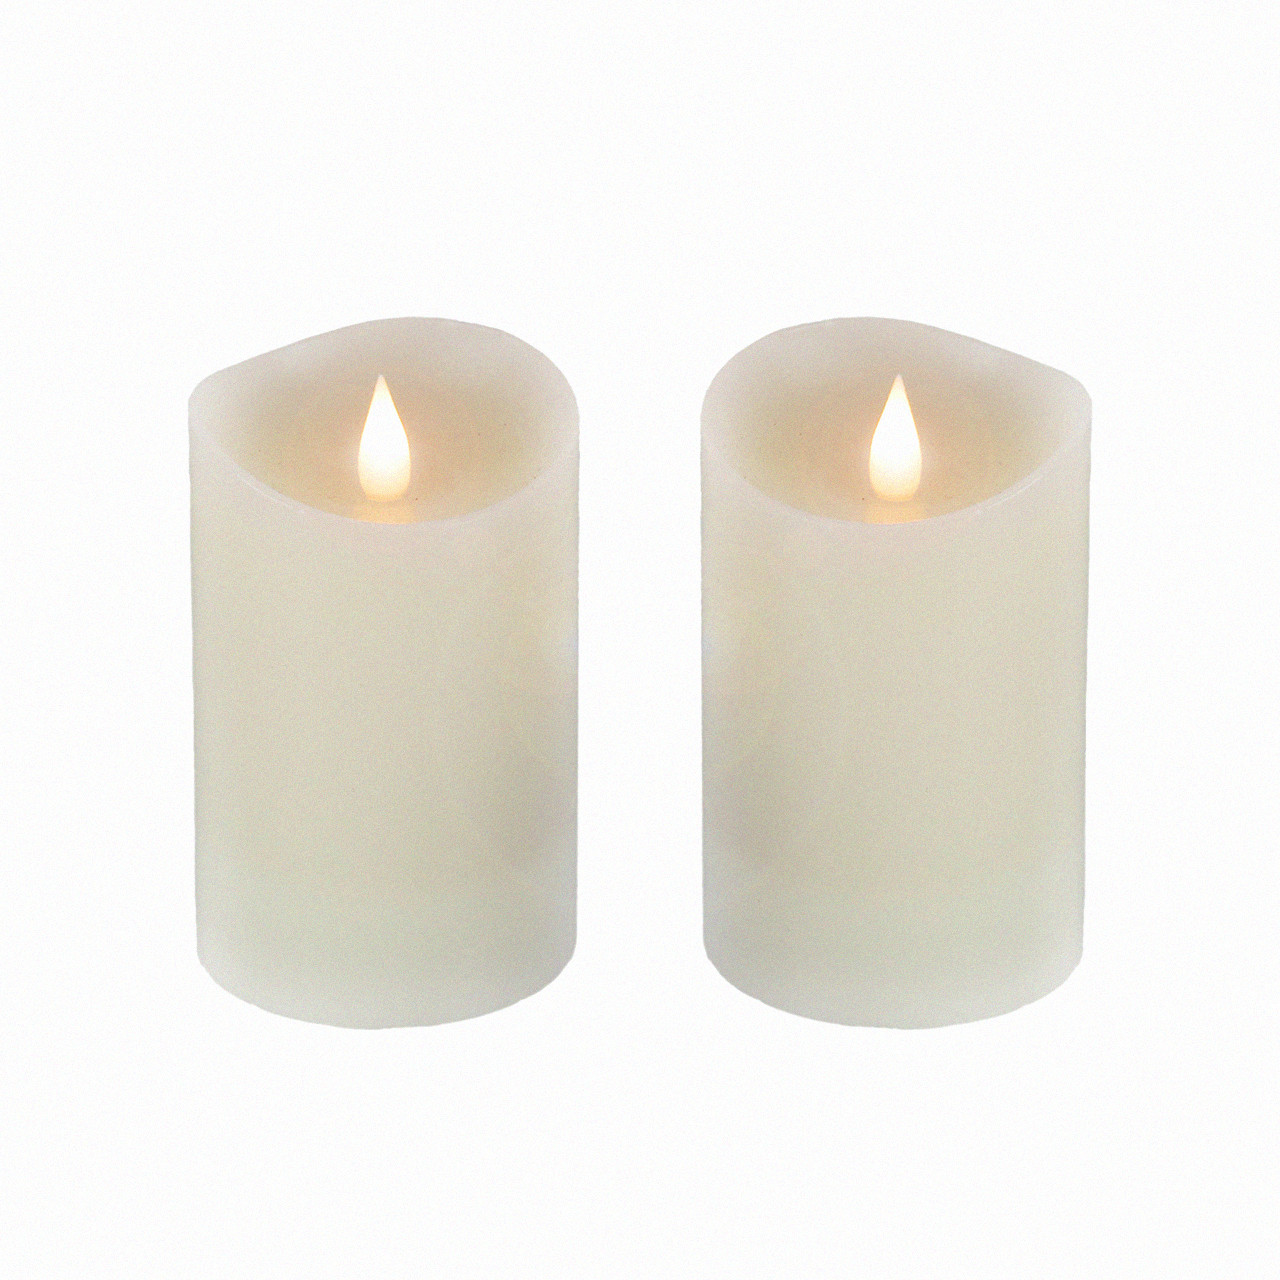 National Tree Company 2 in. x 5 in. Heritage Real Motion Flameless LED Candle, Set of 2